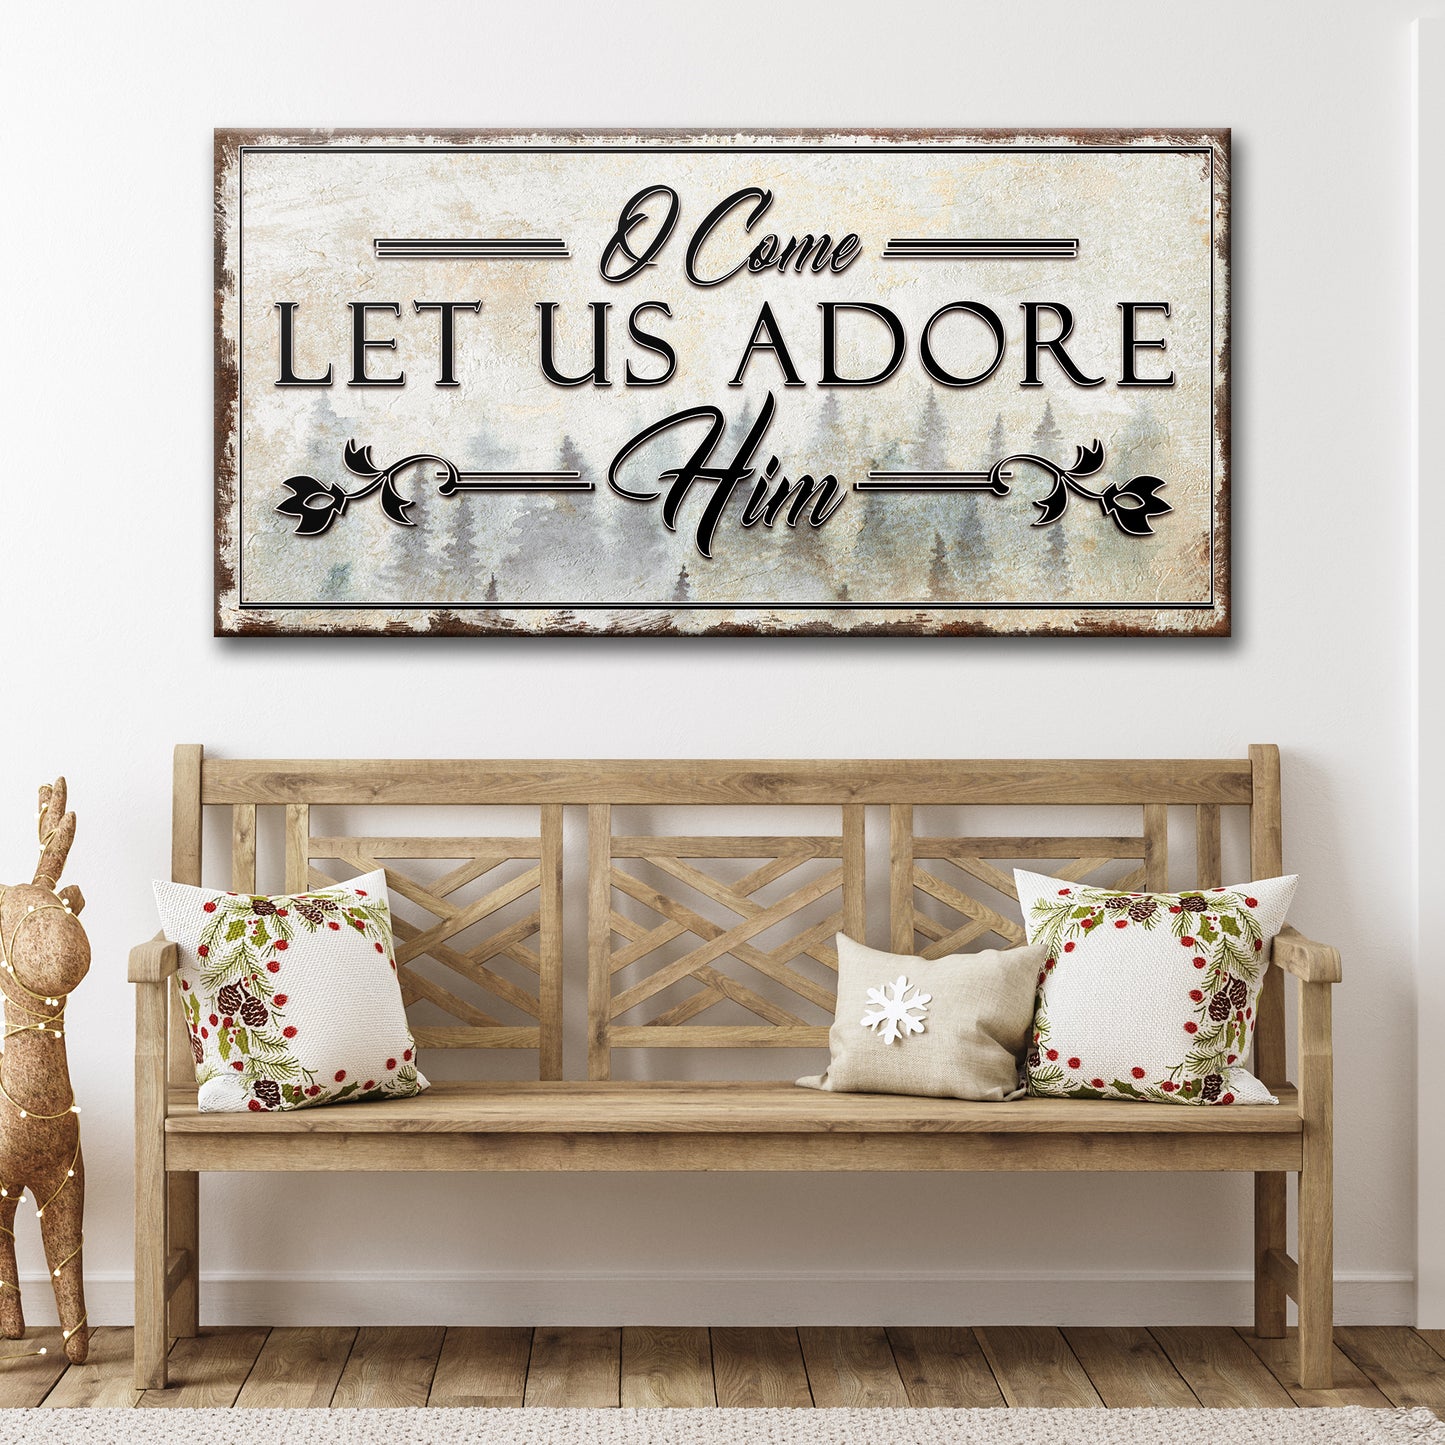 O Come Let Us Adore Him Sign  - Image by Tailored Canvases